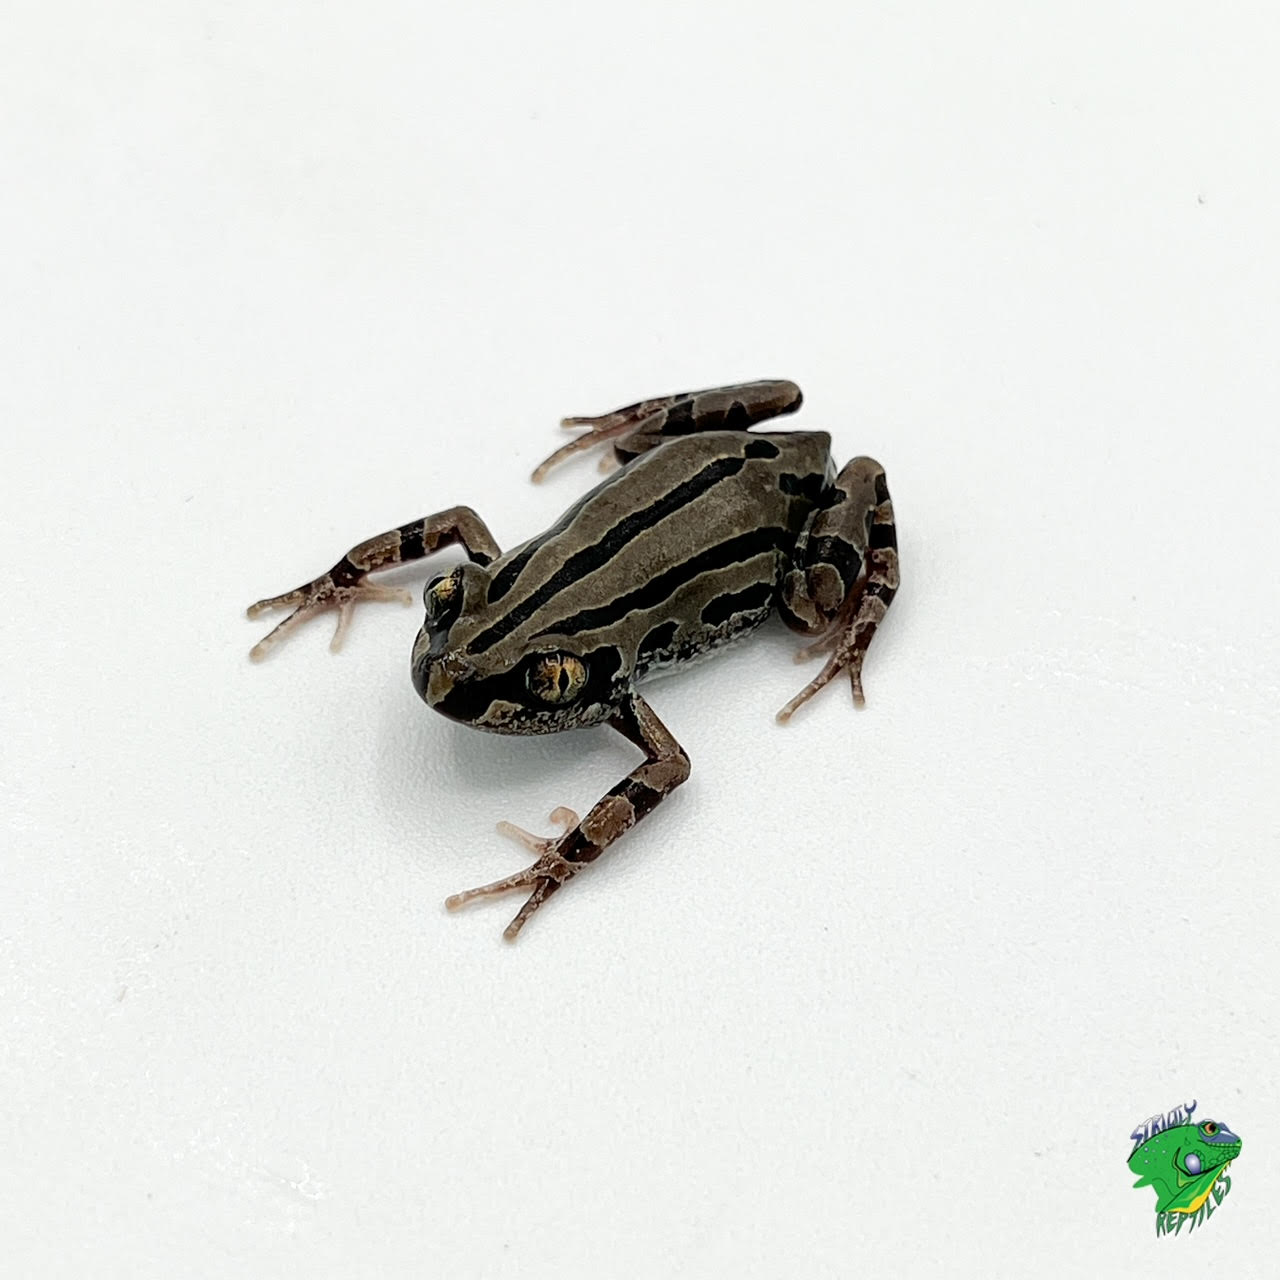 Green & Black Walking Frog - adult - Strictly Reptiles